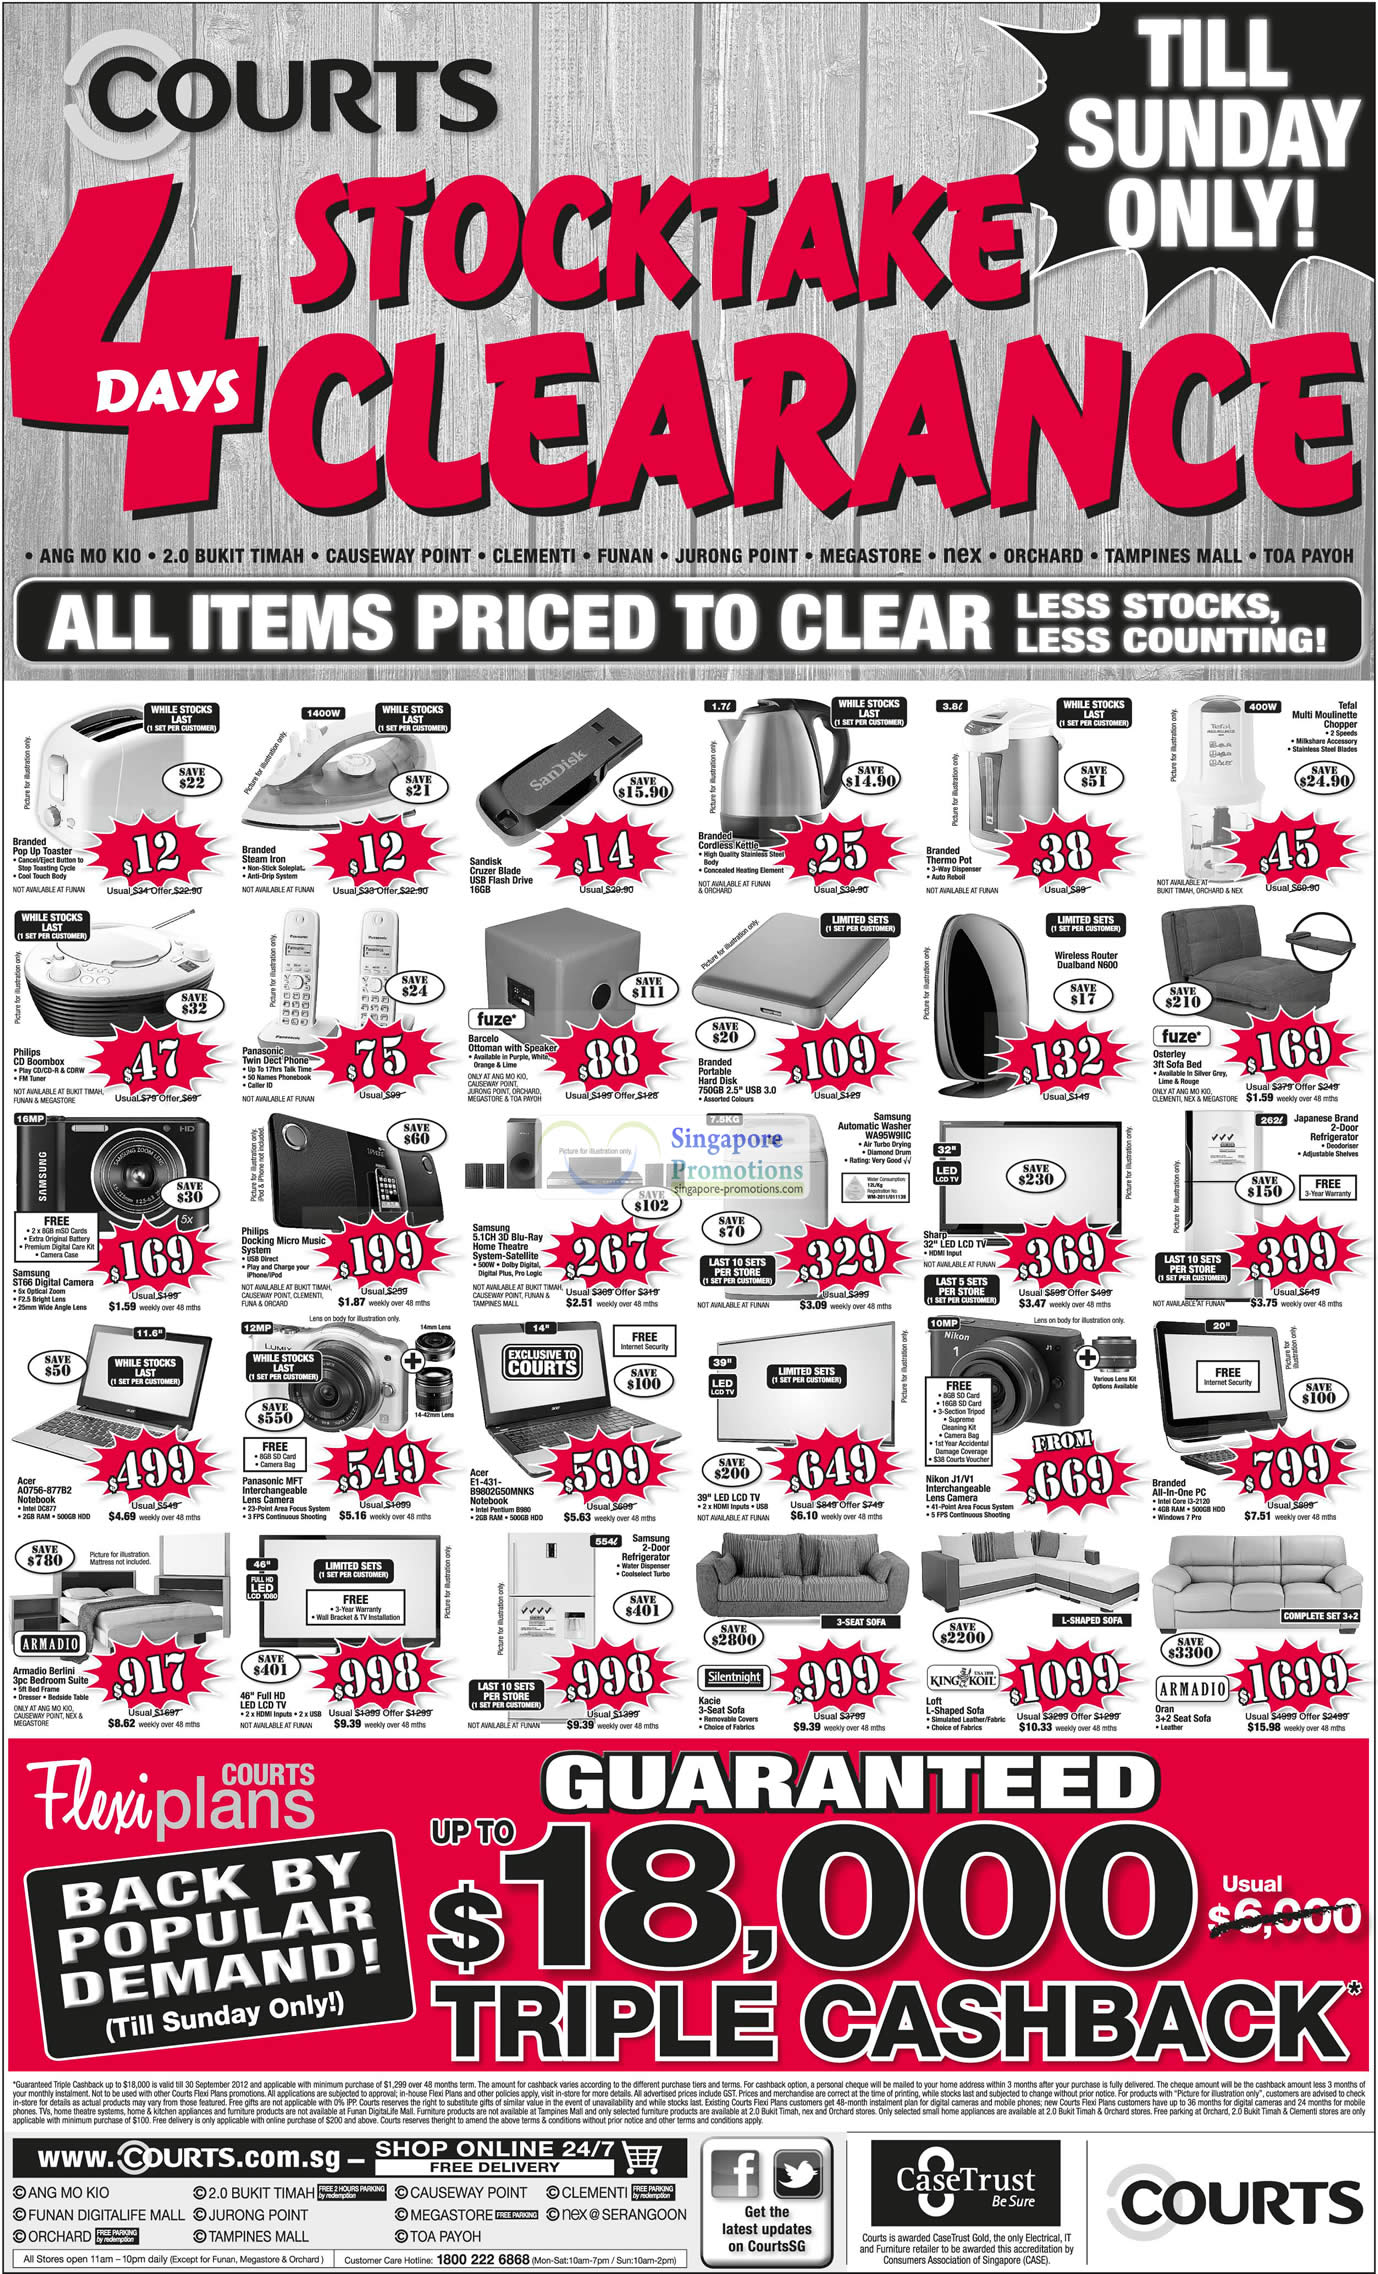 Featured image for Courts Stocktake Clearance Sale 29 - 30 Sep 2012